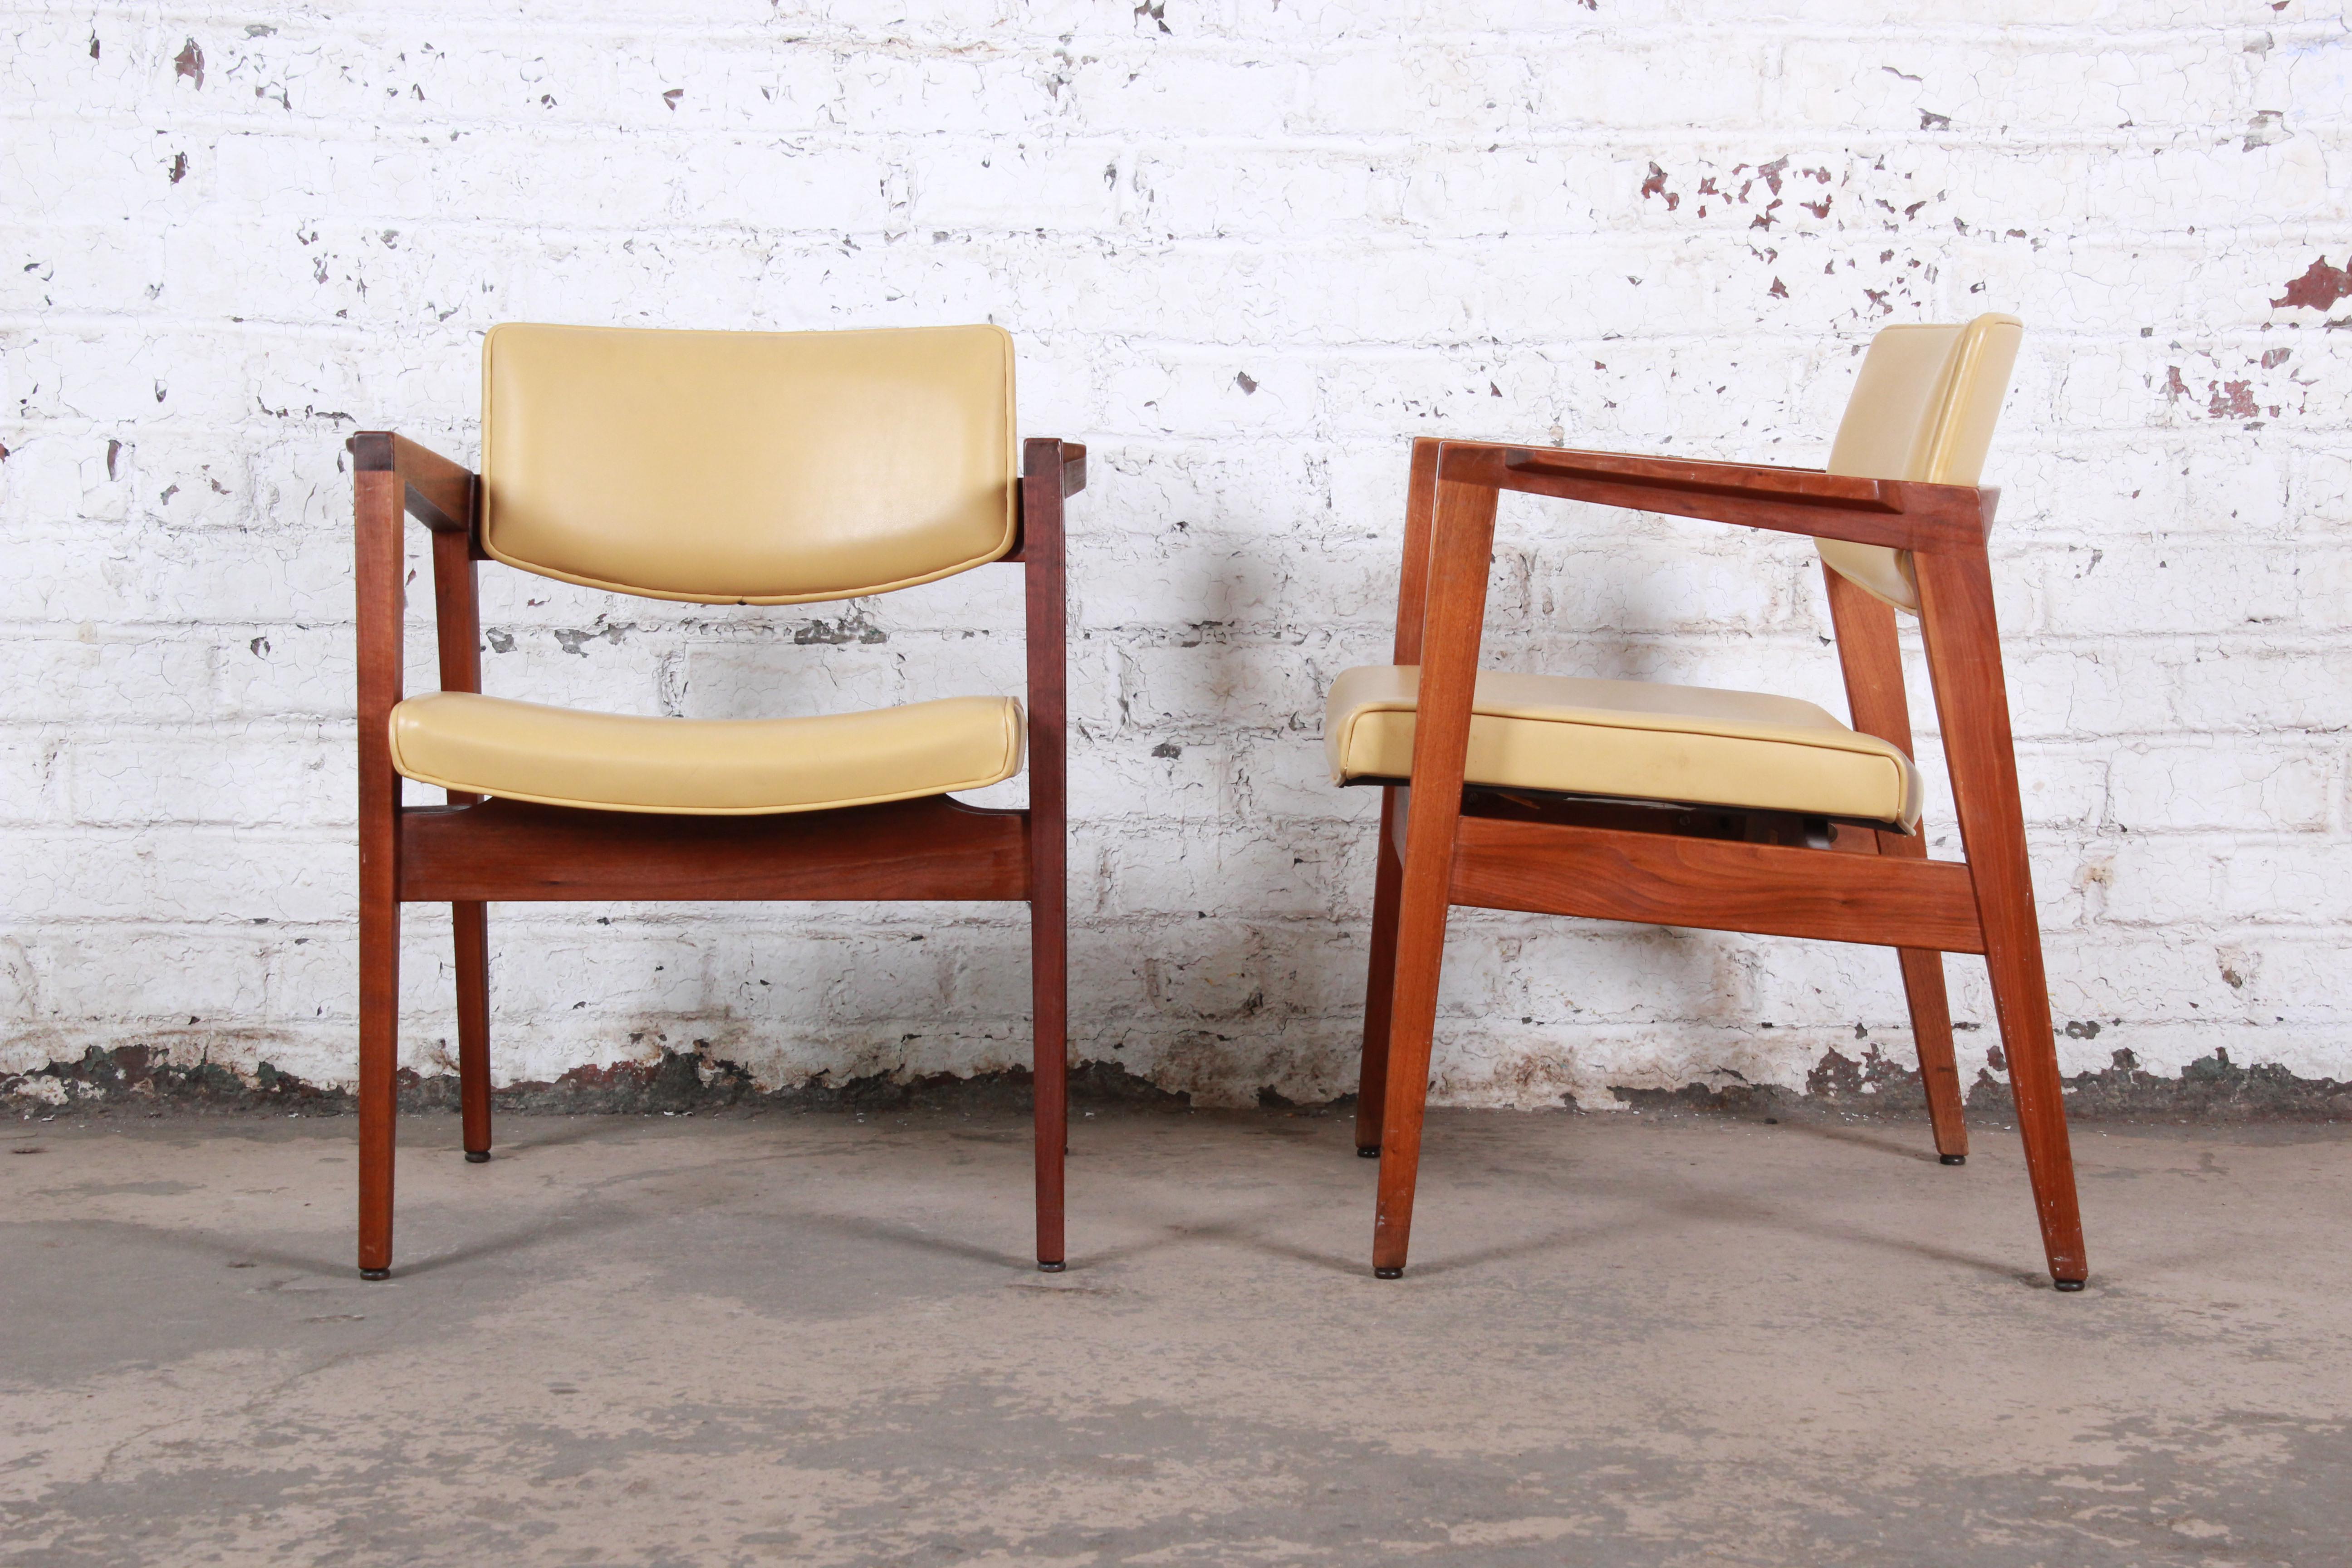 A gorgeous pair of Jens Risom style Mid-Century Modern walnut lounge chairs by the Gunlocke Chair Co. of New York, circa 1960. The chairs feature sleek sculpted solid walnut frames, with a floating seat and back in original yellow vinyl. The